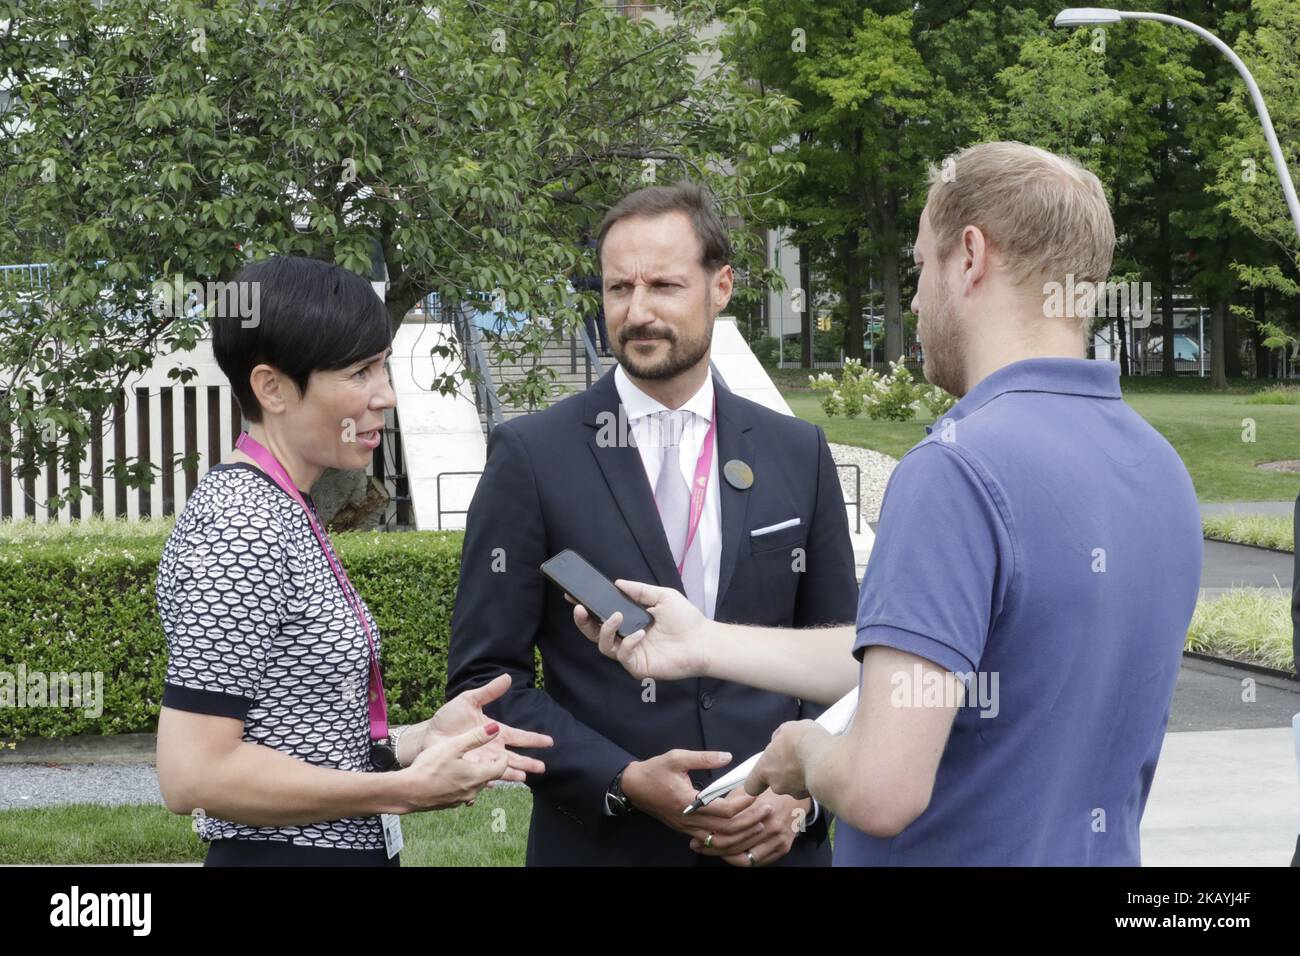 Haakon, Crown Prince of Norway and Ine Eriksen Soreide Norwegian Minister of Foreign Affairs During the launch of Norways campaign for an elected seat in the Security Council, term 2021-2022 today at the UN Headquarters Rose Garden in New York, NY on June 22, 2018. (Photo by Luiz Rampelotto/NurPhoto) Stock Photo